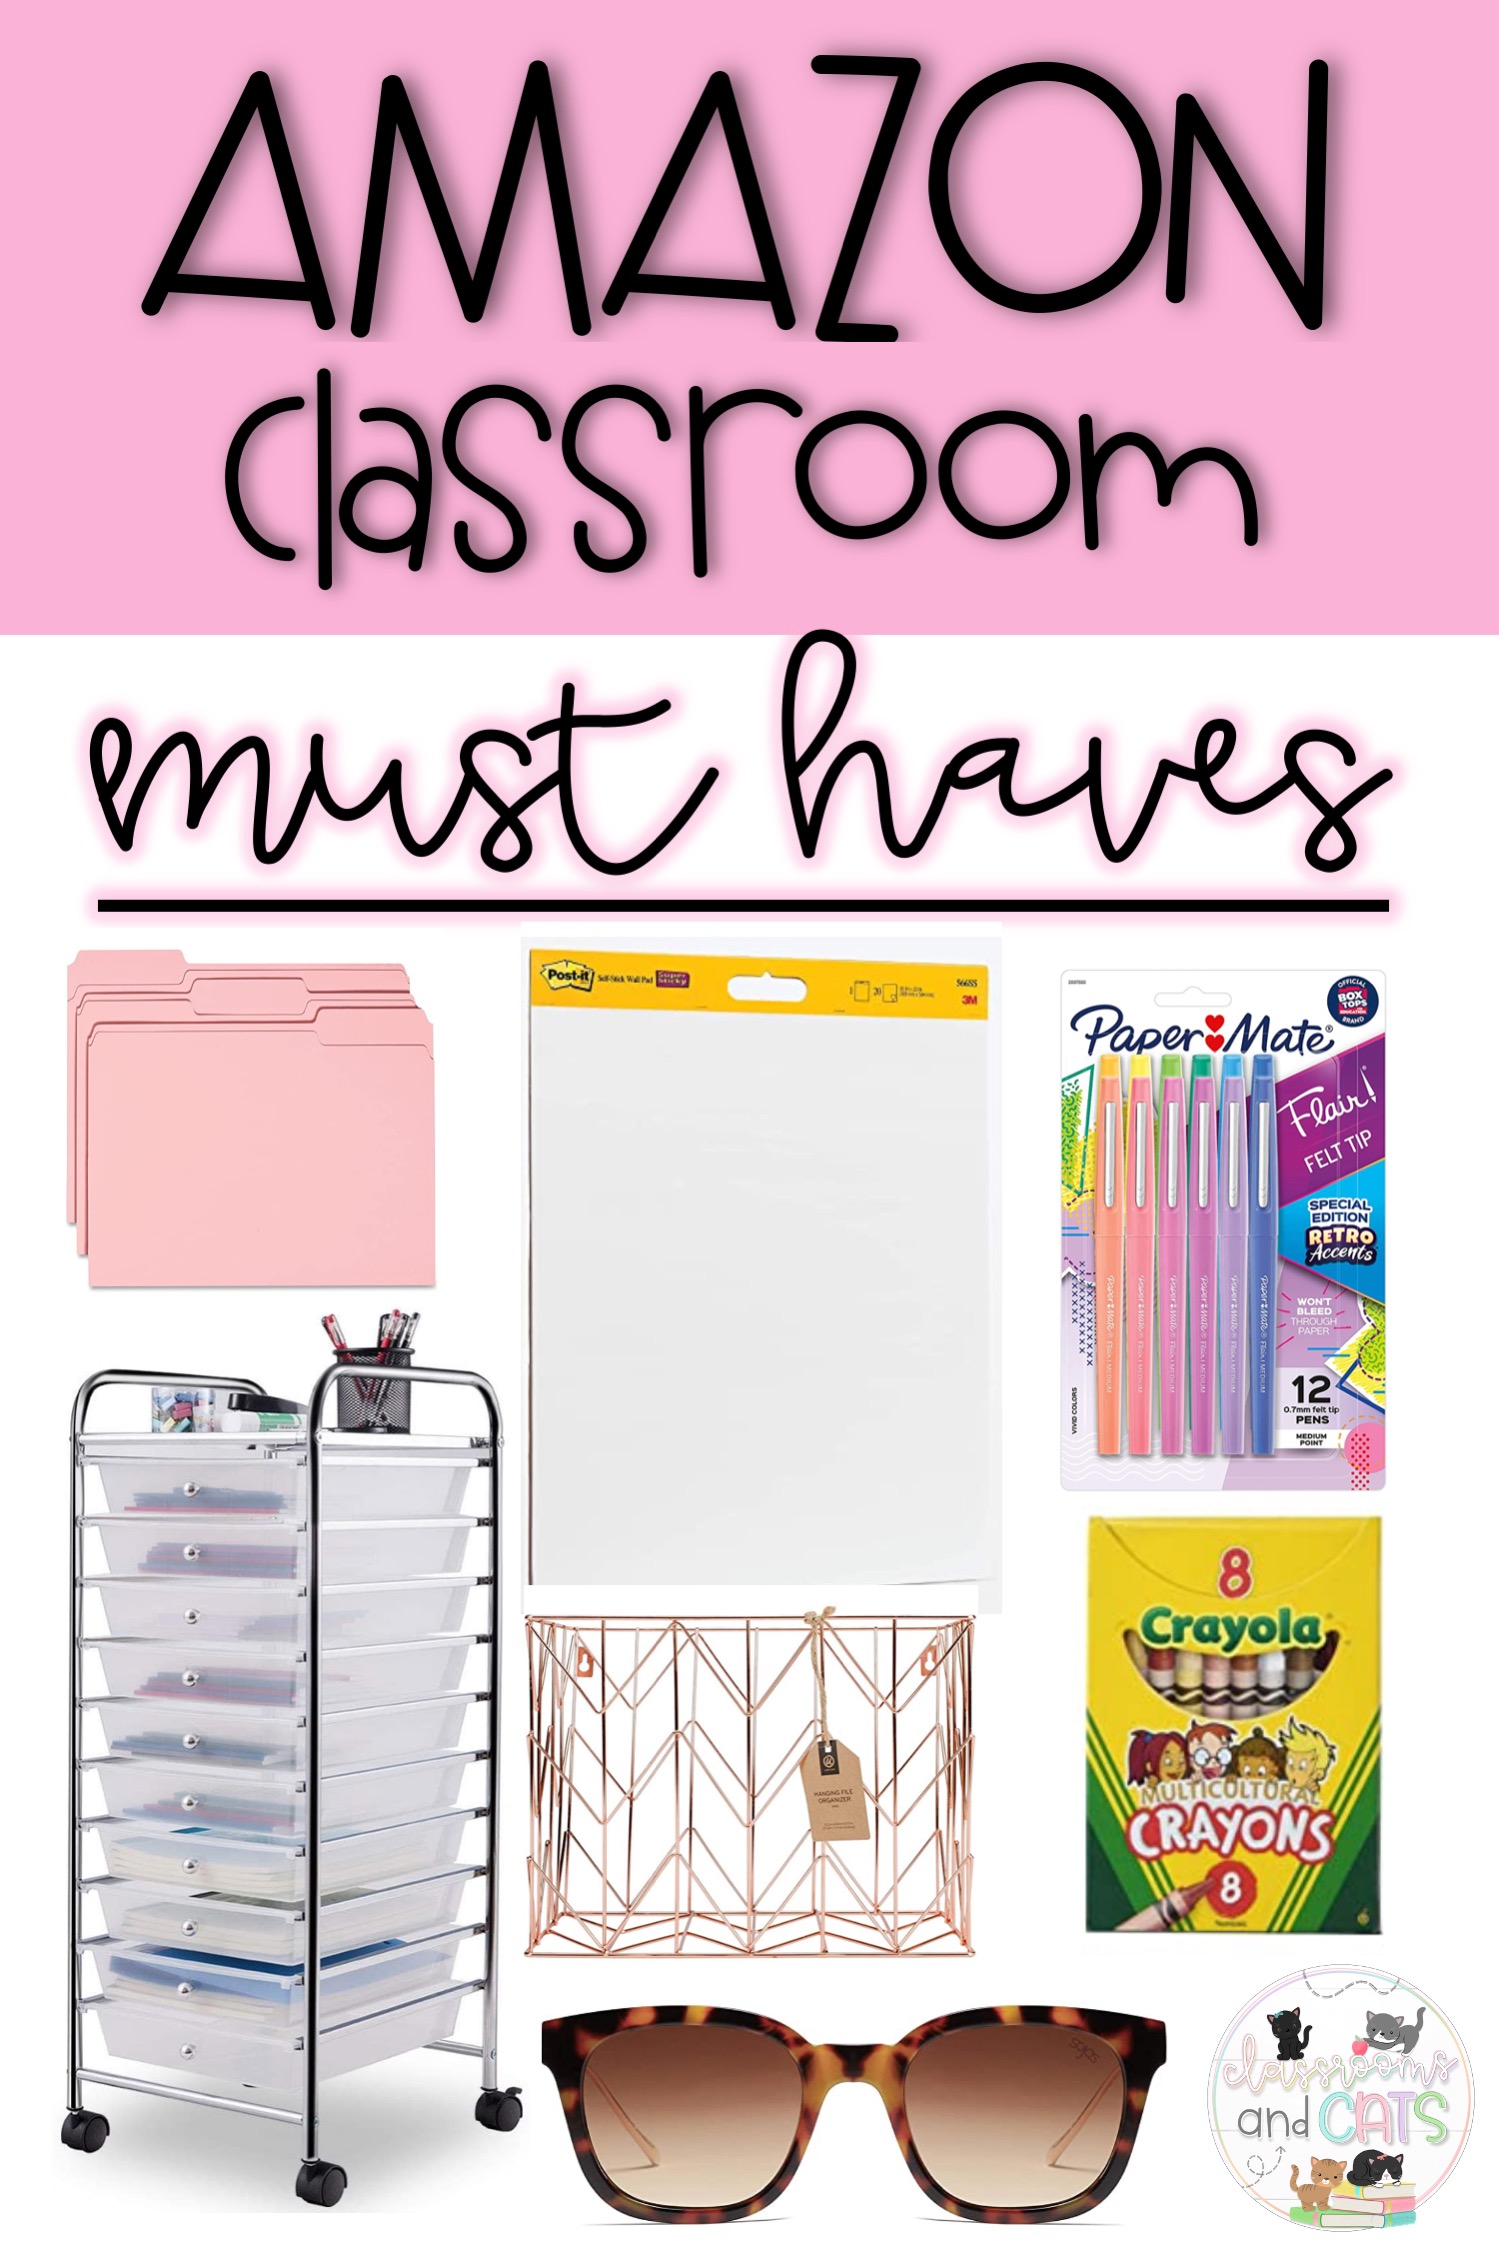 Classroom Must Haves from